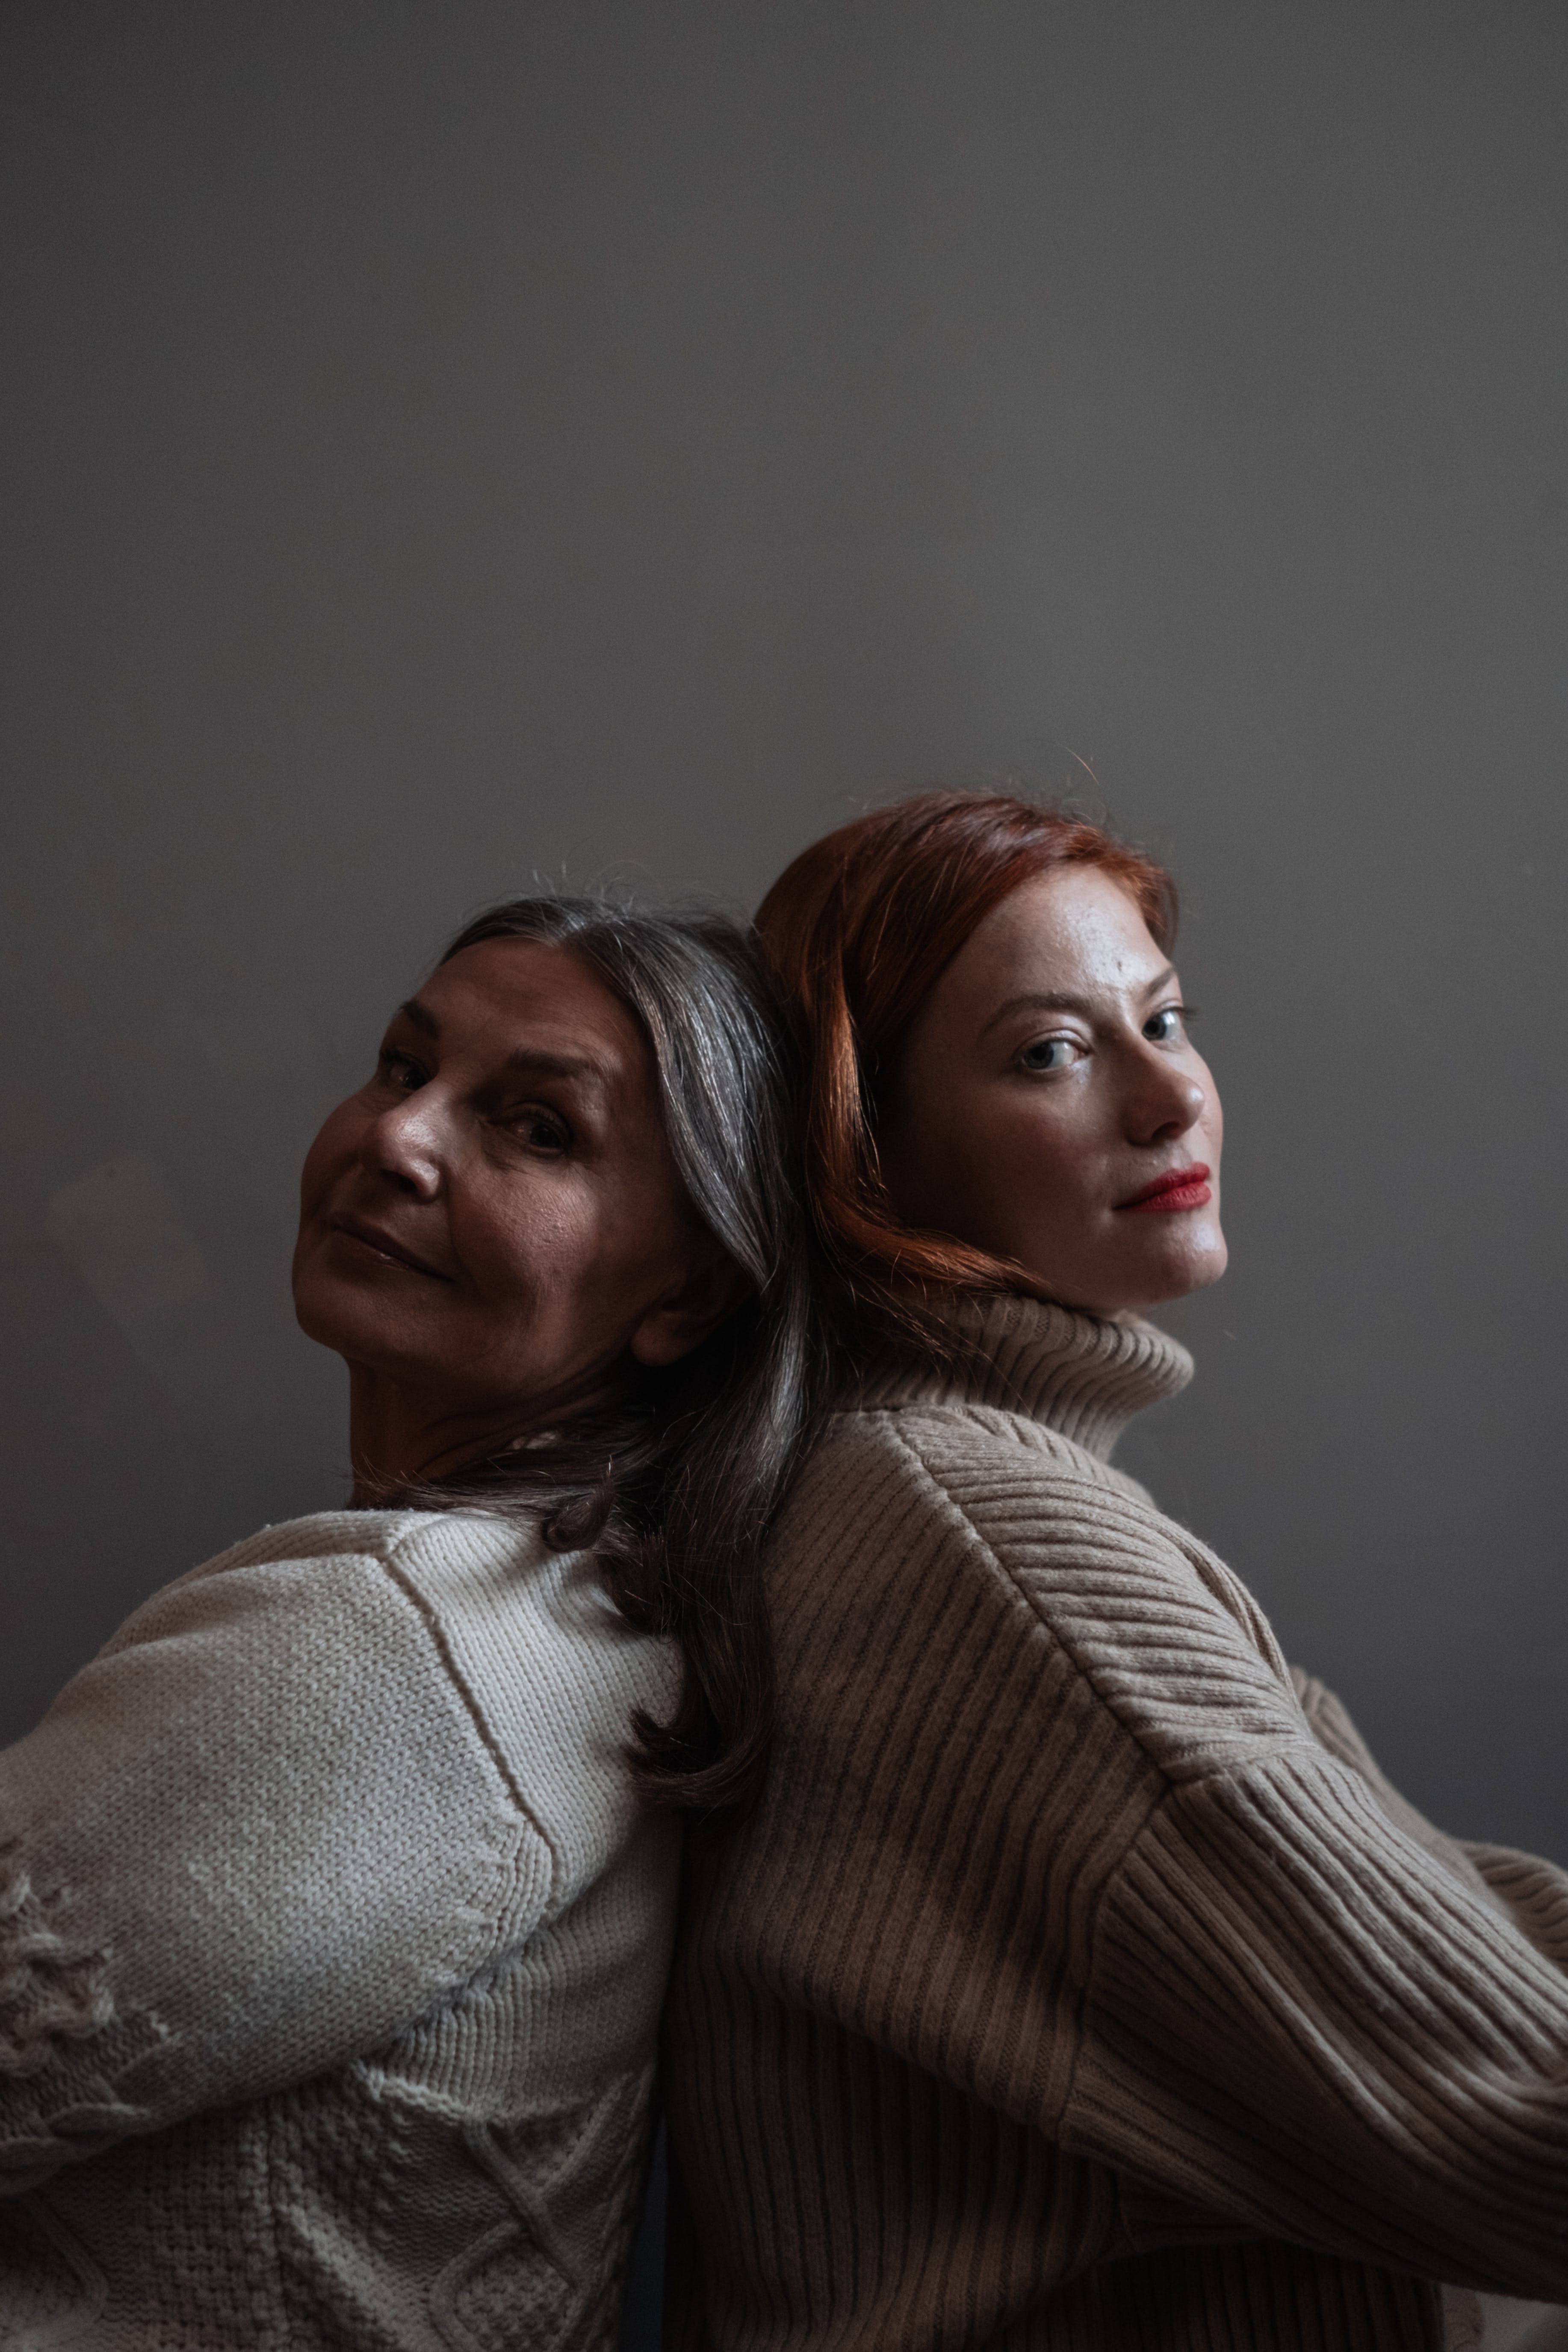 Mother and daughter leaning on each other's backs | Source: Pexels